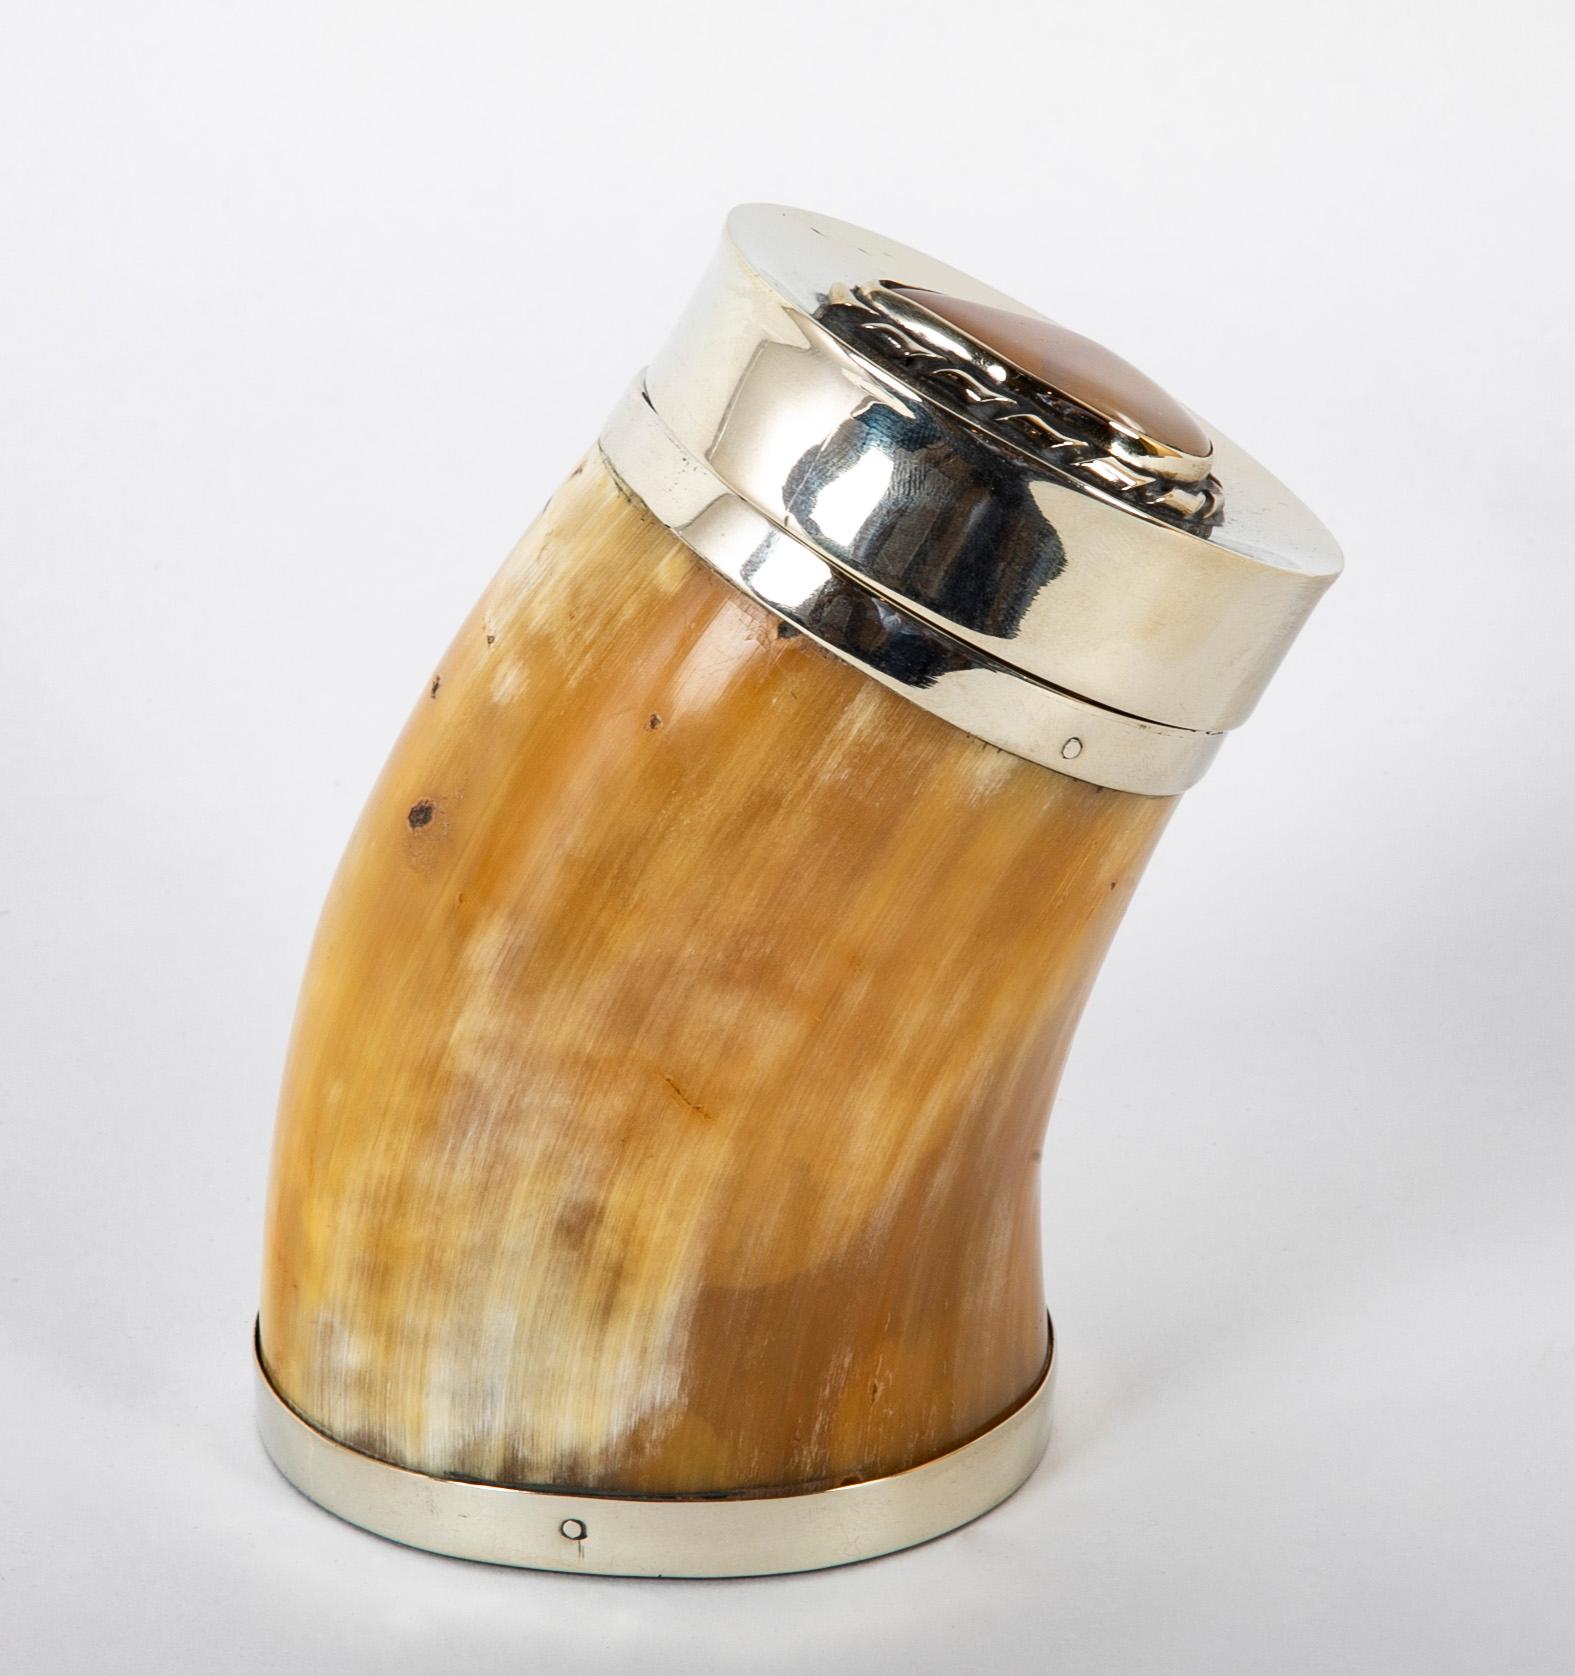 Beautifully made vintage steer horn box by Anthony Redmile. With polished horn body and hand hammered nickle plated brass mounts. The top with an inset framed opal. Signed on bottom 'Redmile Objects, 73 Pimlico Road, London.

Anthony Redmile was